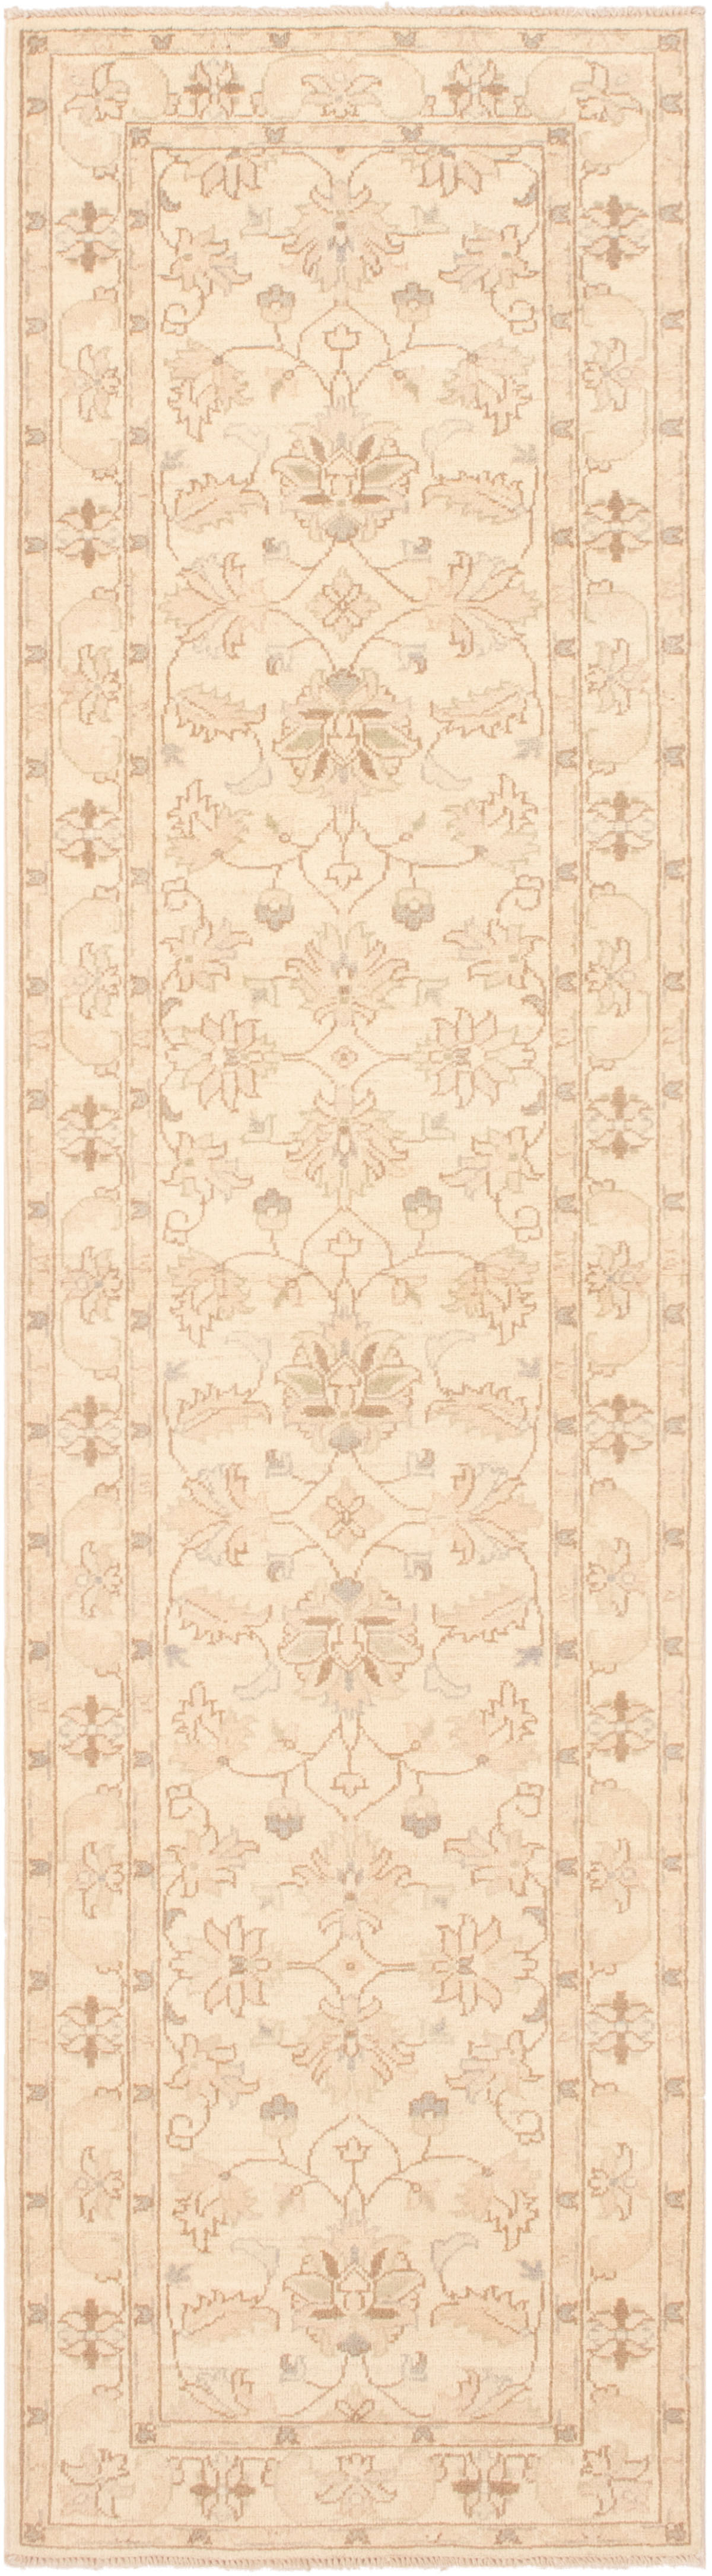 Hand-knotted Peshawar Finest Cream Wool Rug 2'6" x 9'10" Size: 2'6" x 9'10"  